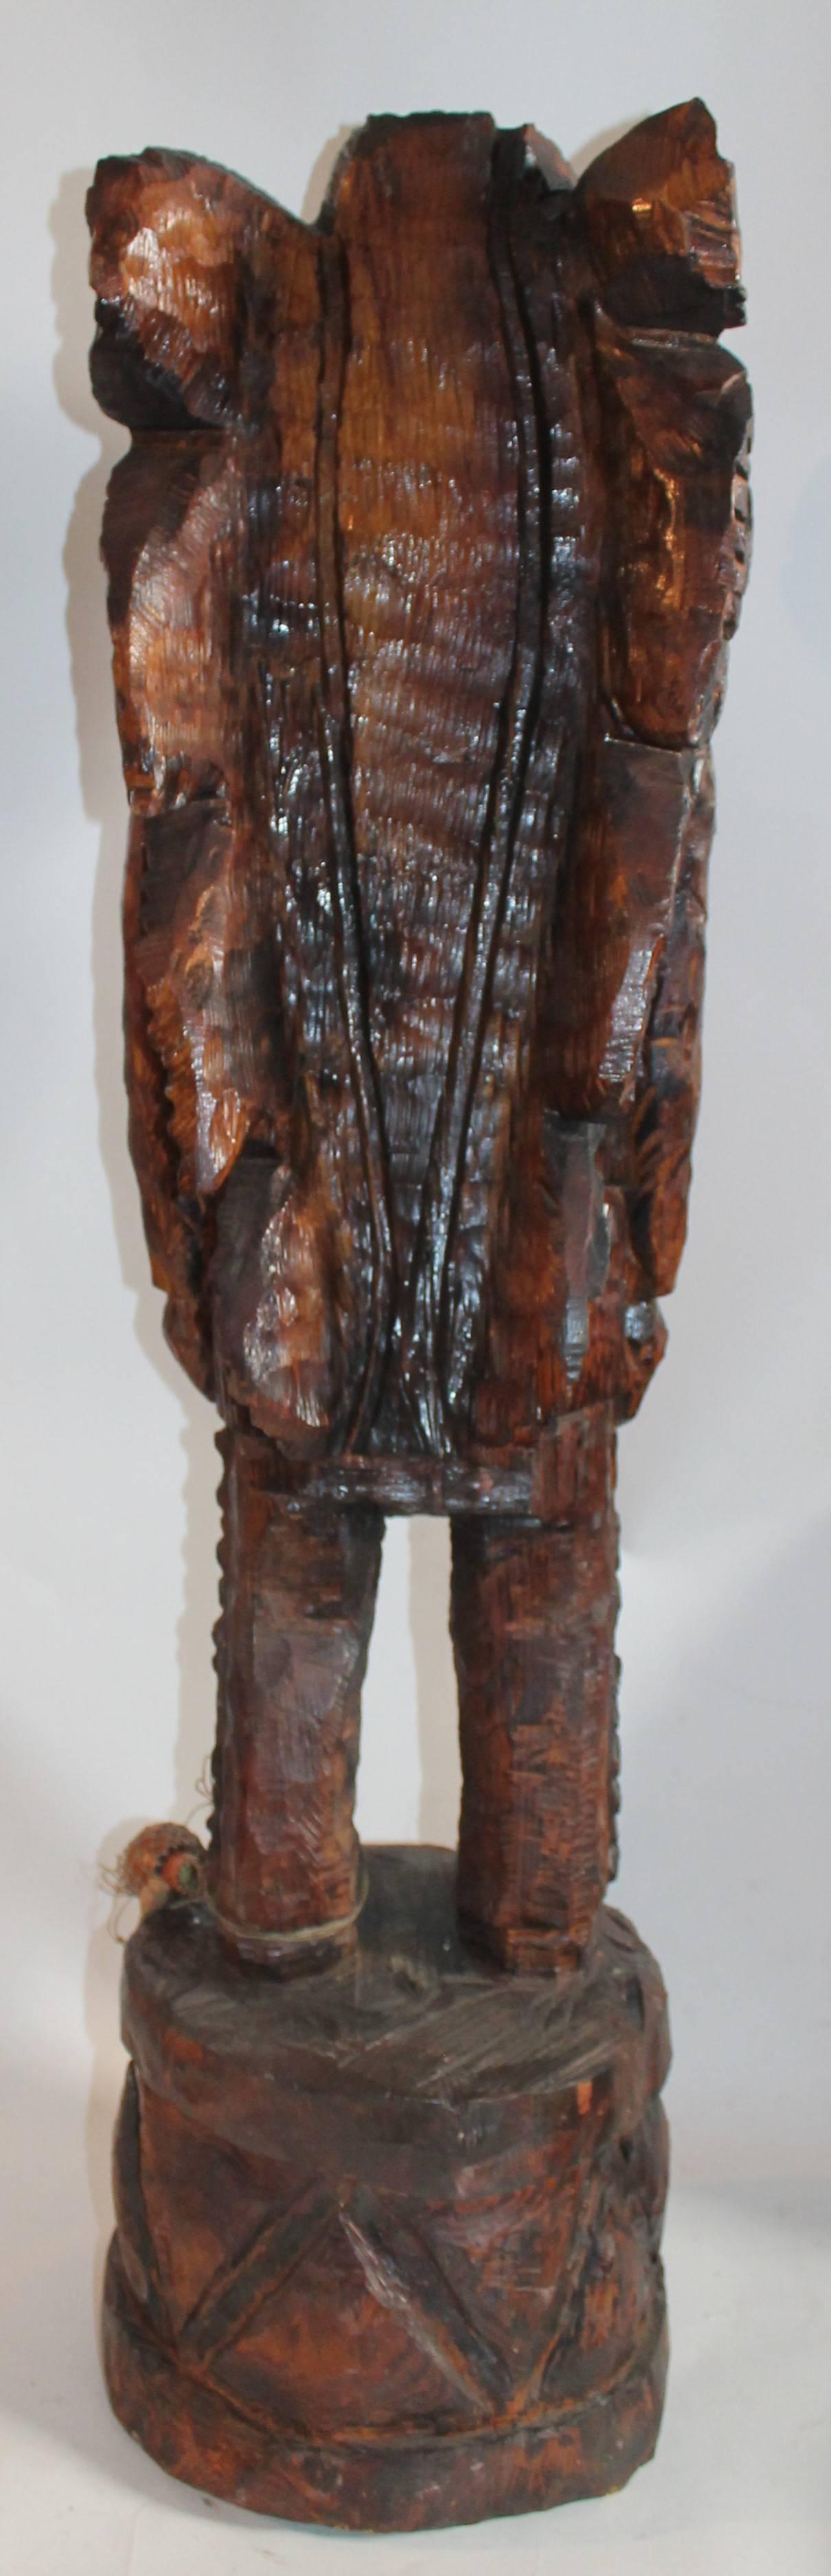 Hand-Carved Cigar Store Indian Great Old Surface